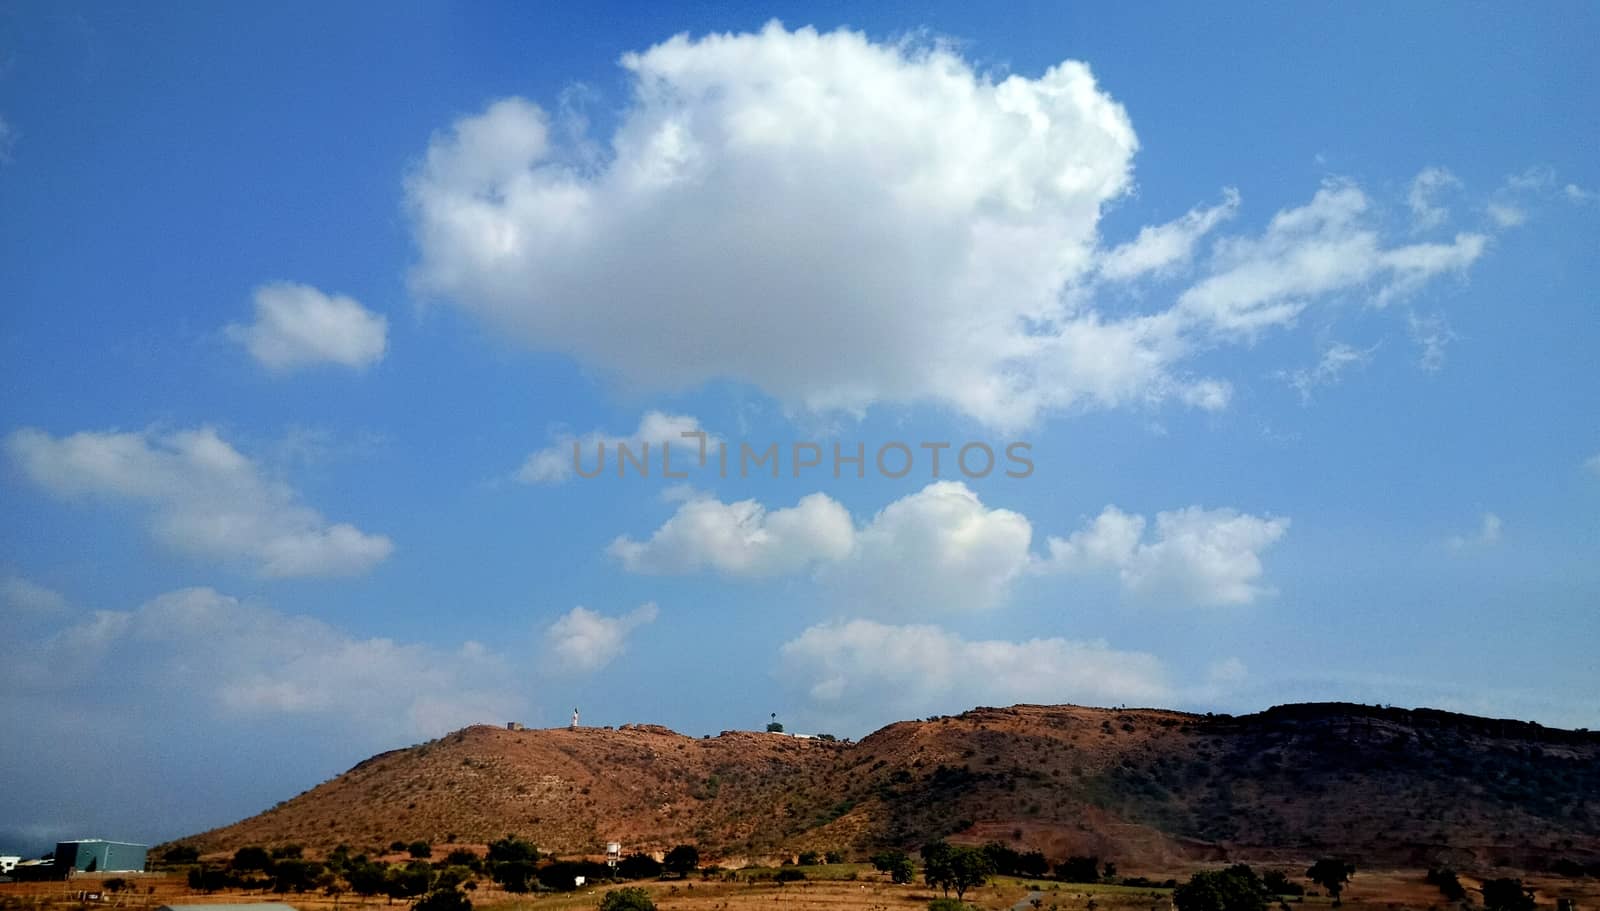 Landscape with Mountain, clouds and trees clicked by ravindrabhu165165@gmail.com